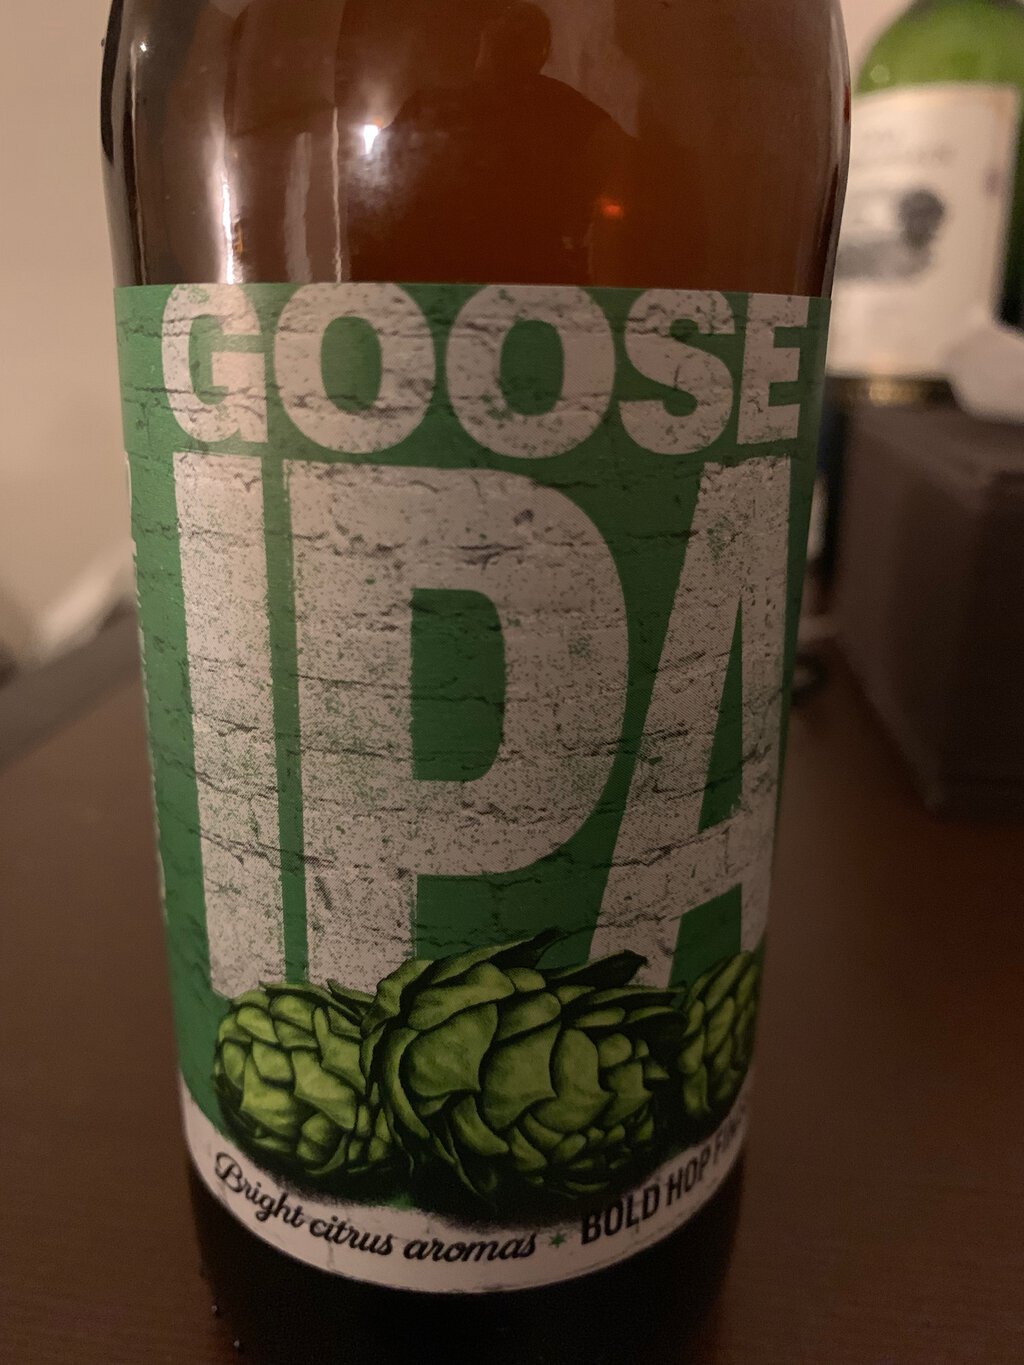 Goose IPA, found in several places in Japan